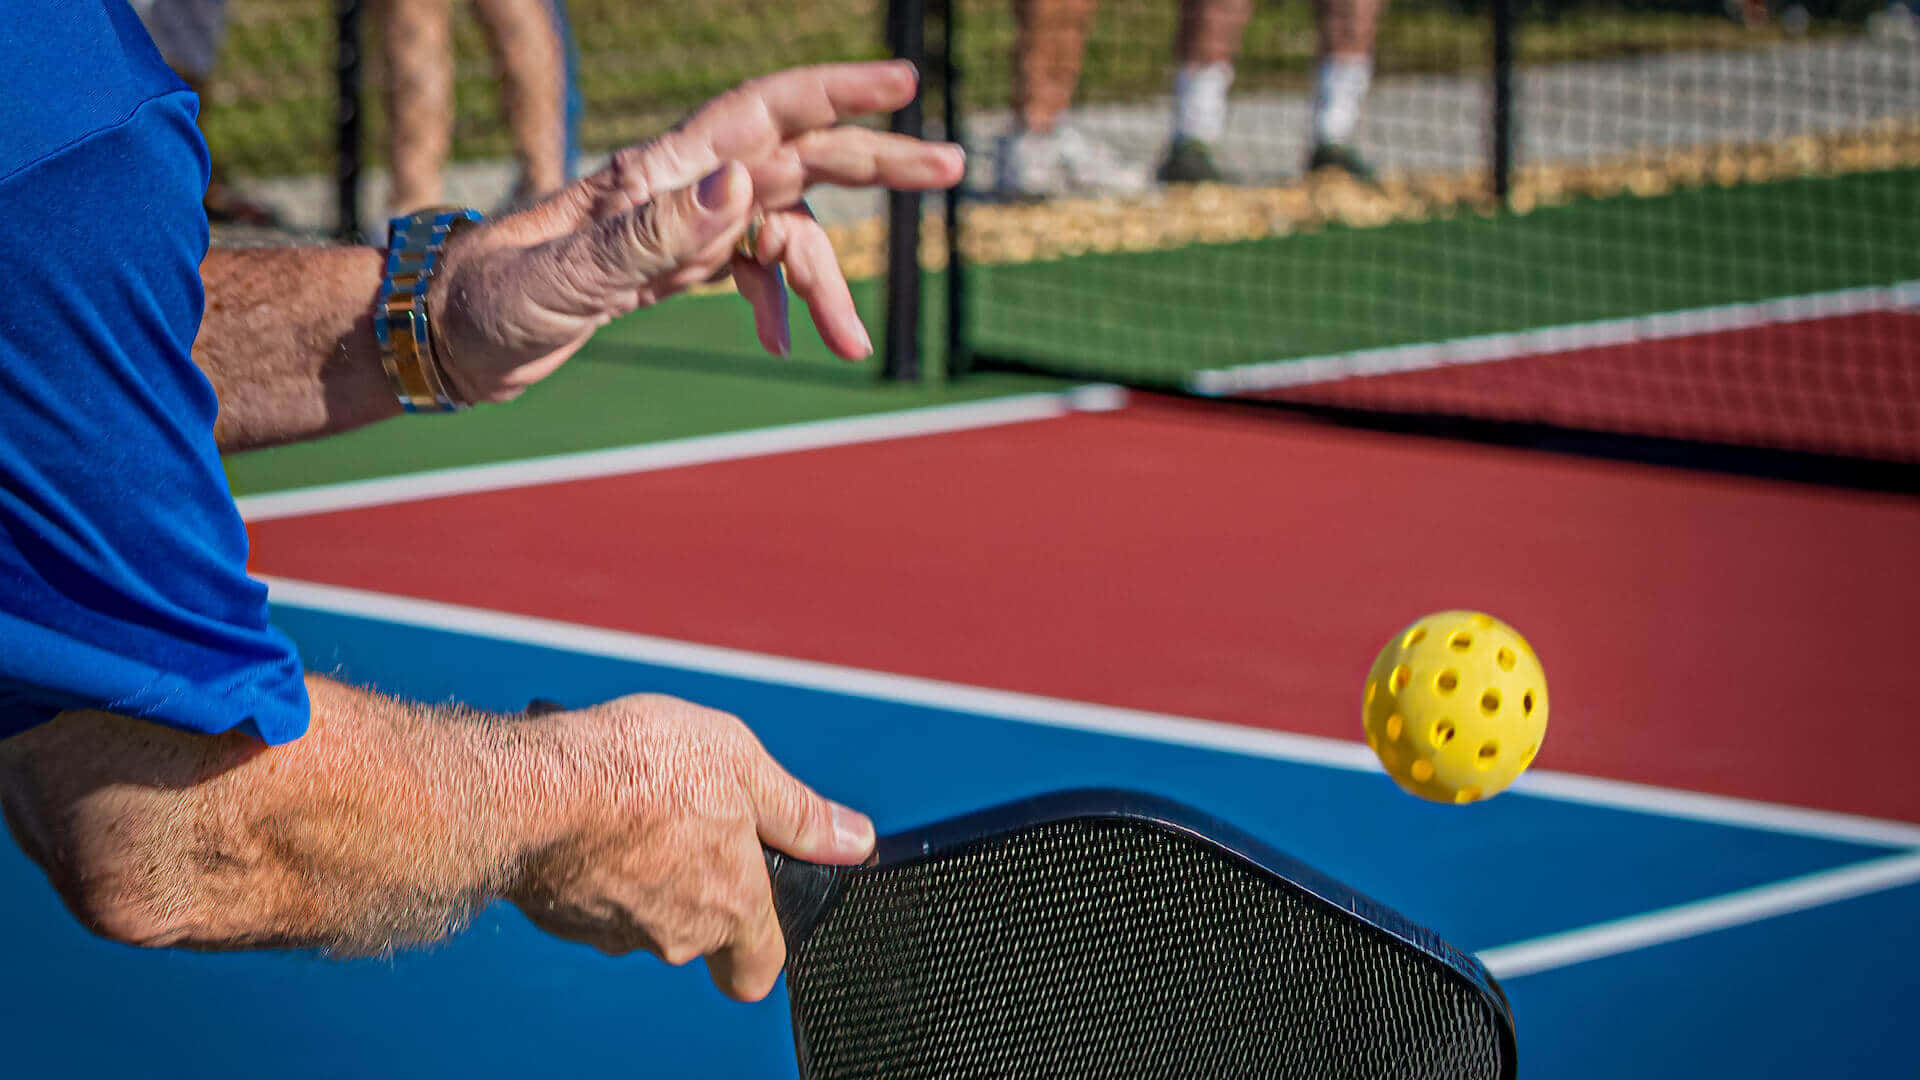 The Perfect Match: Pickleball Combines Fun and Exercise